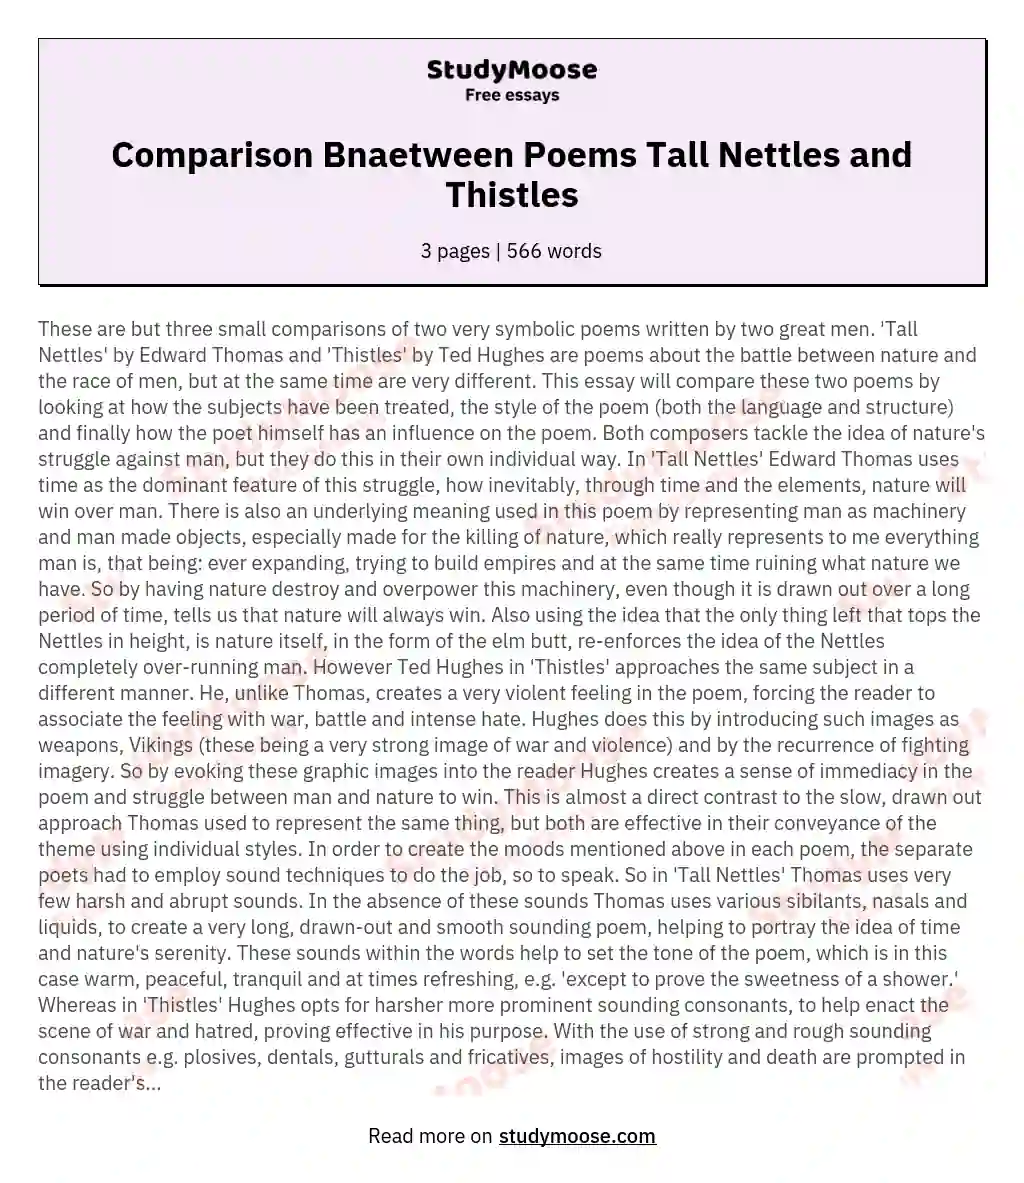 Comparison Bnaetween Poems Tall Nettles and Thistles essay